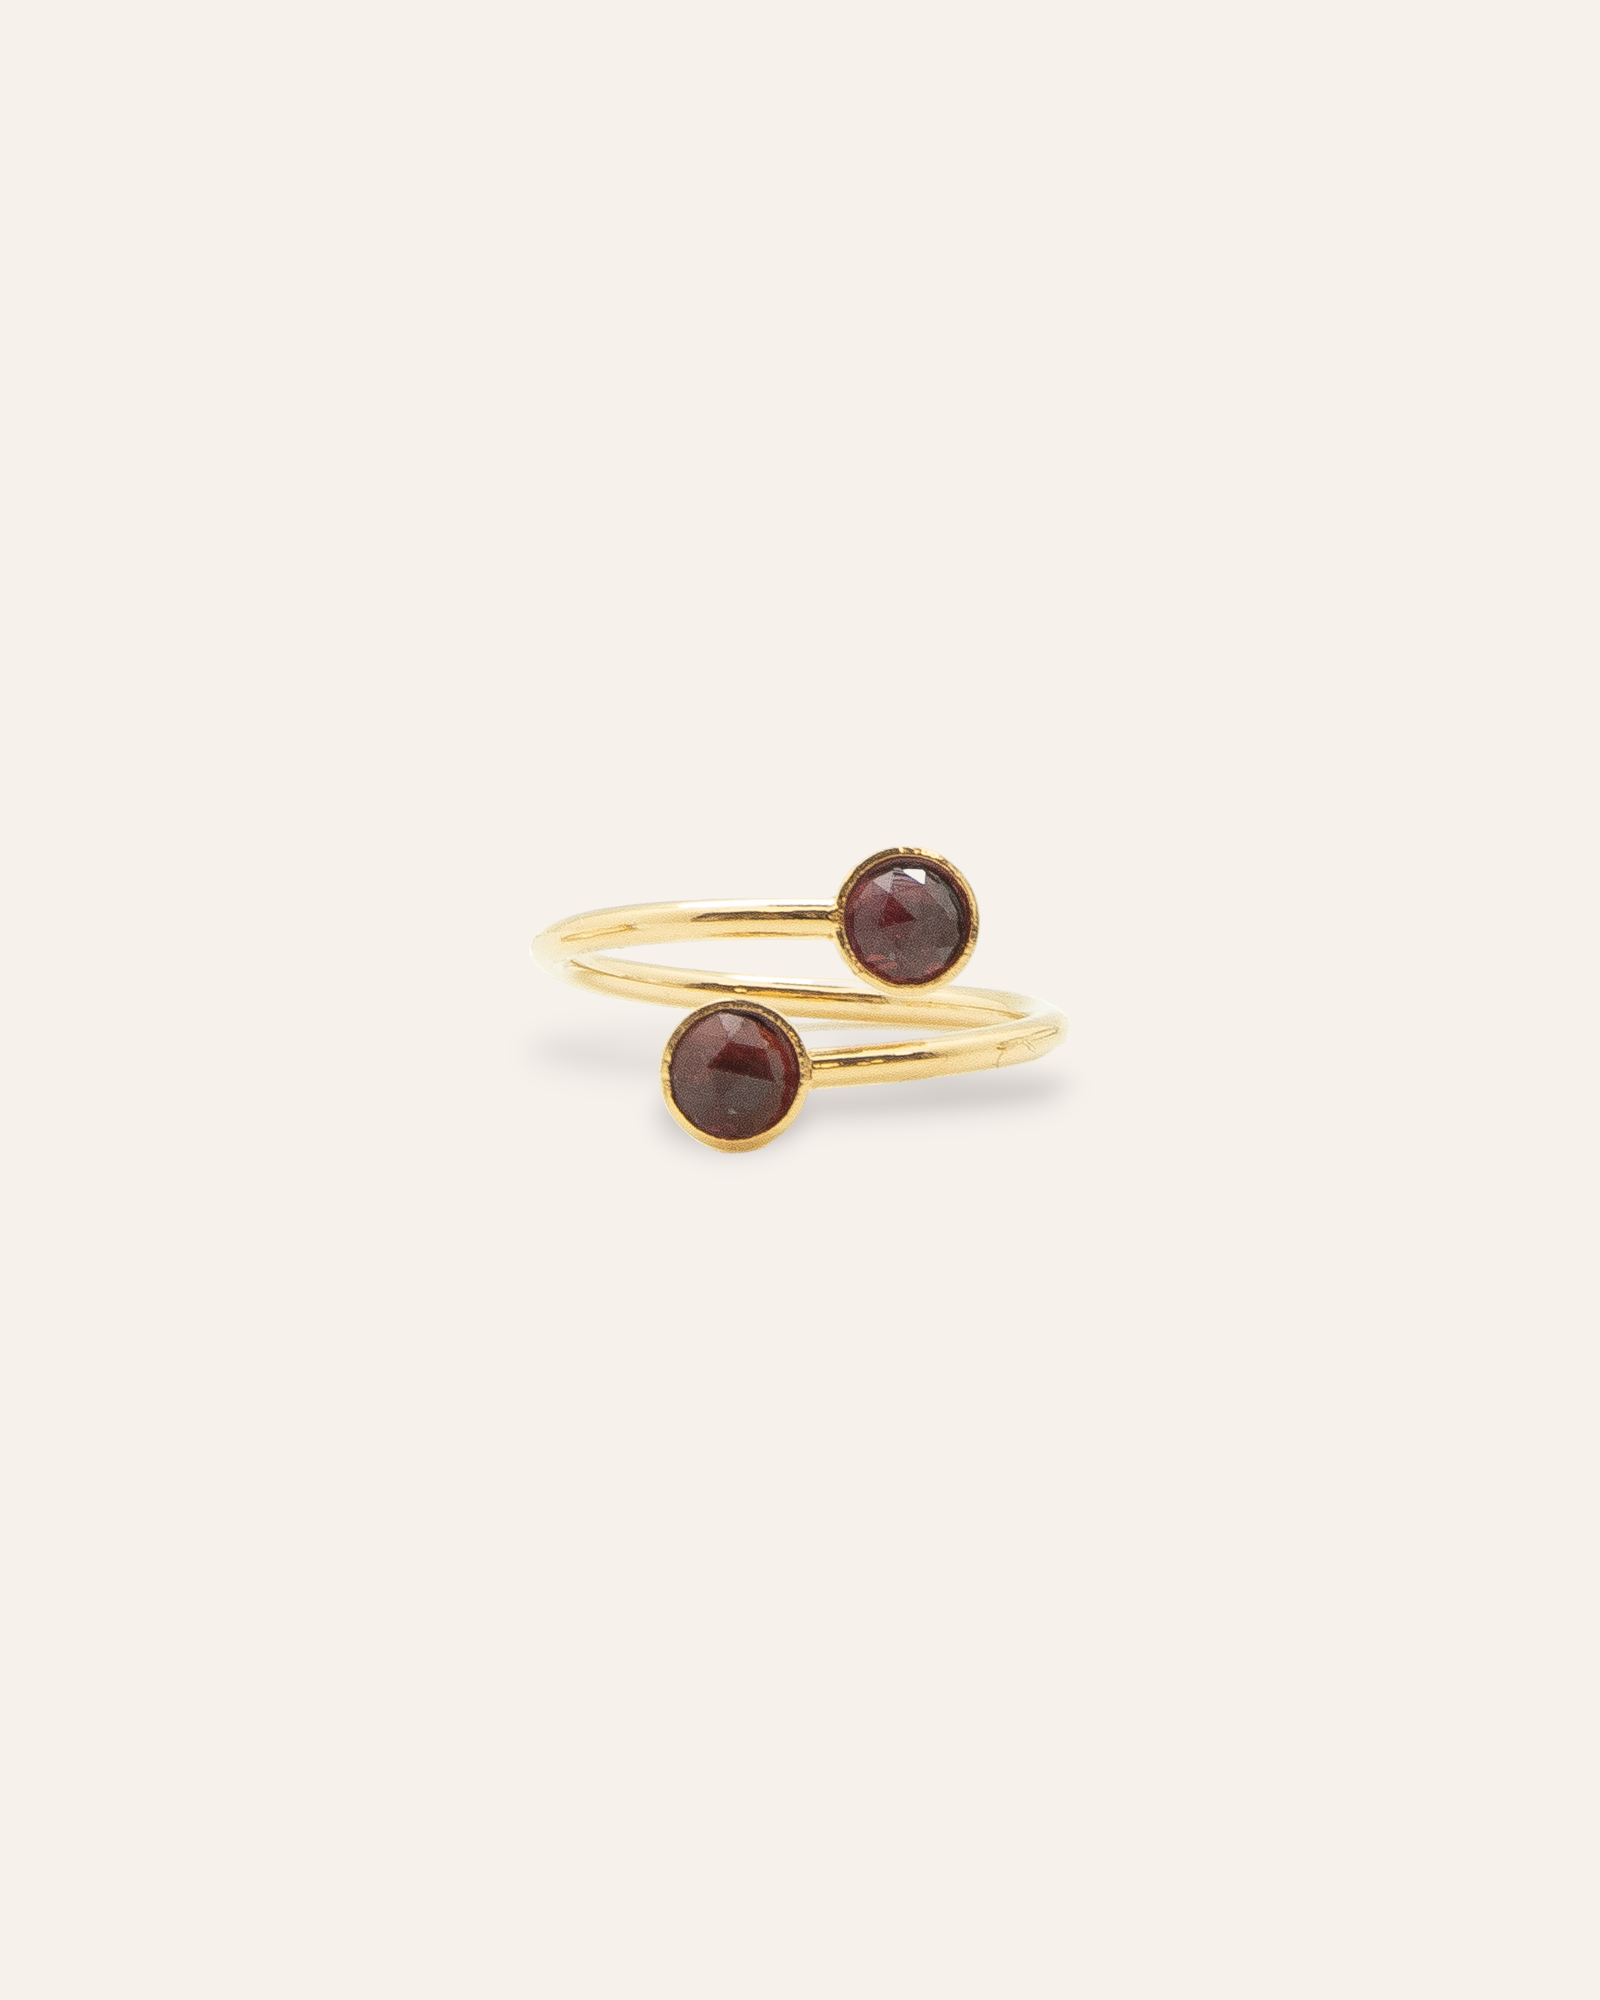 Imagine gold and onyx ring